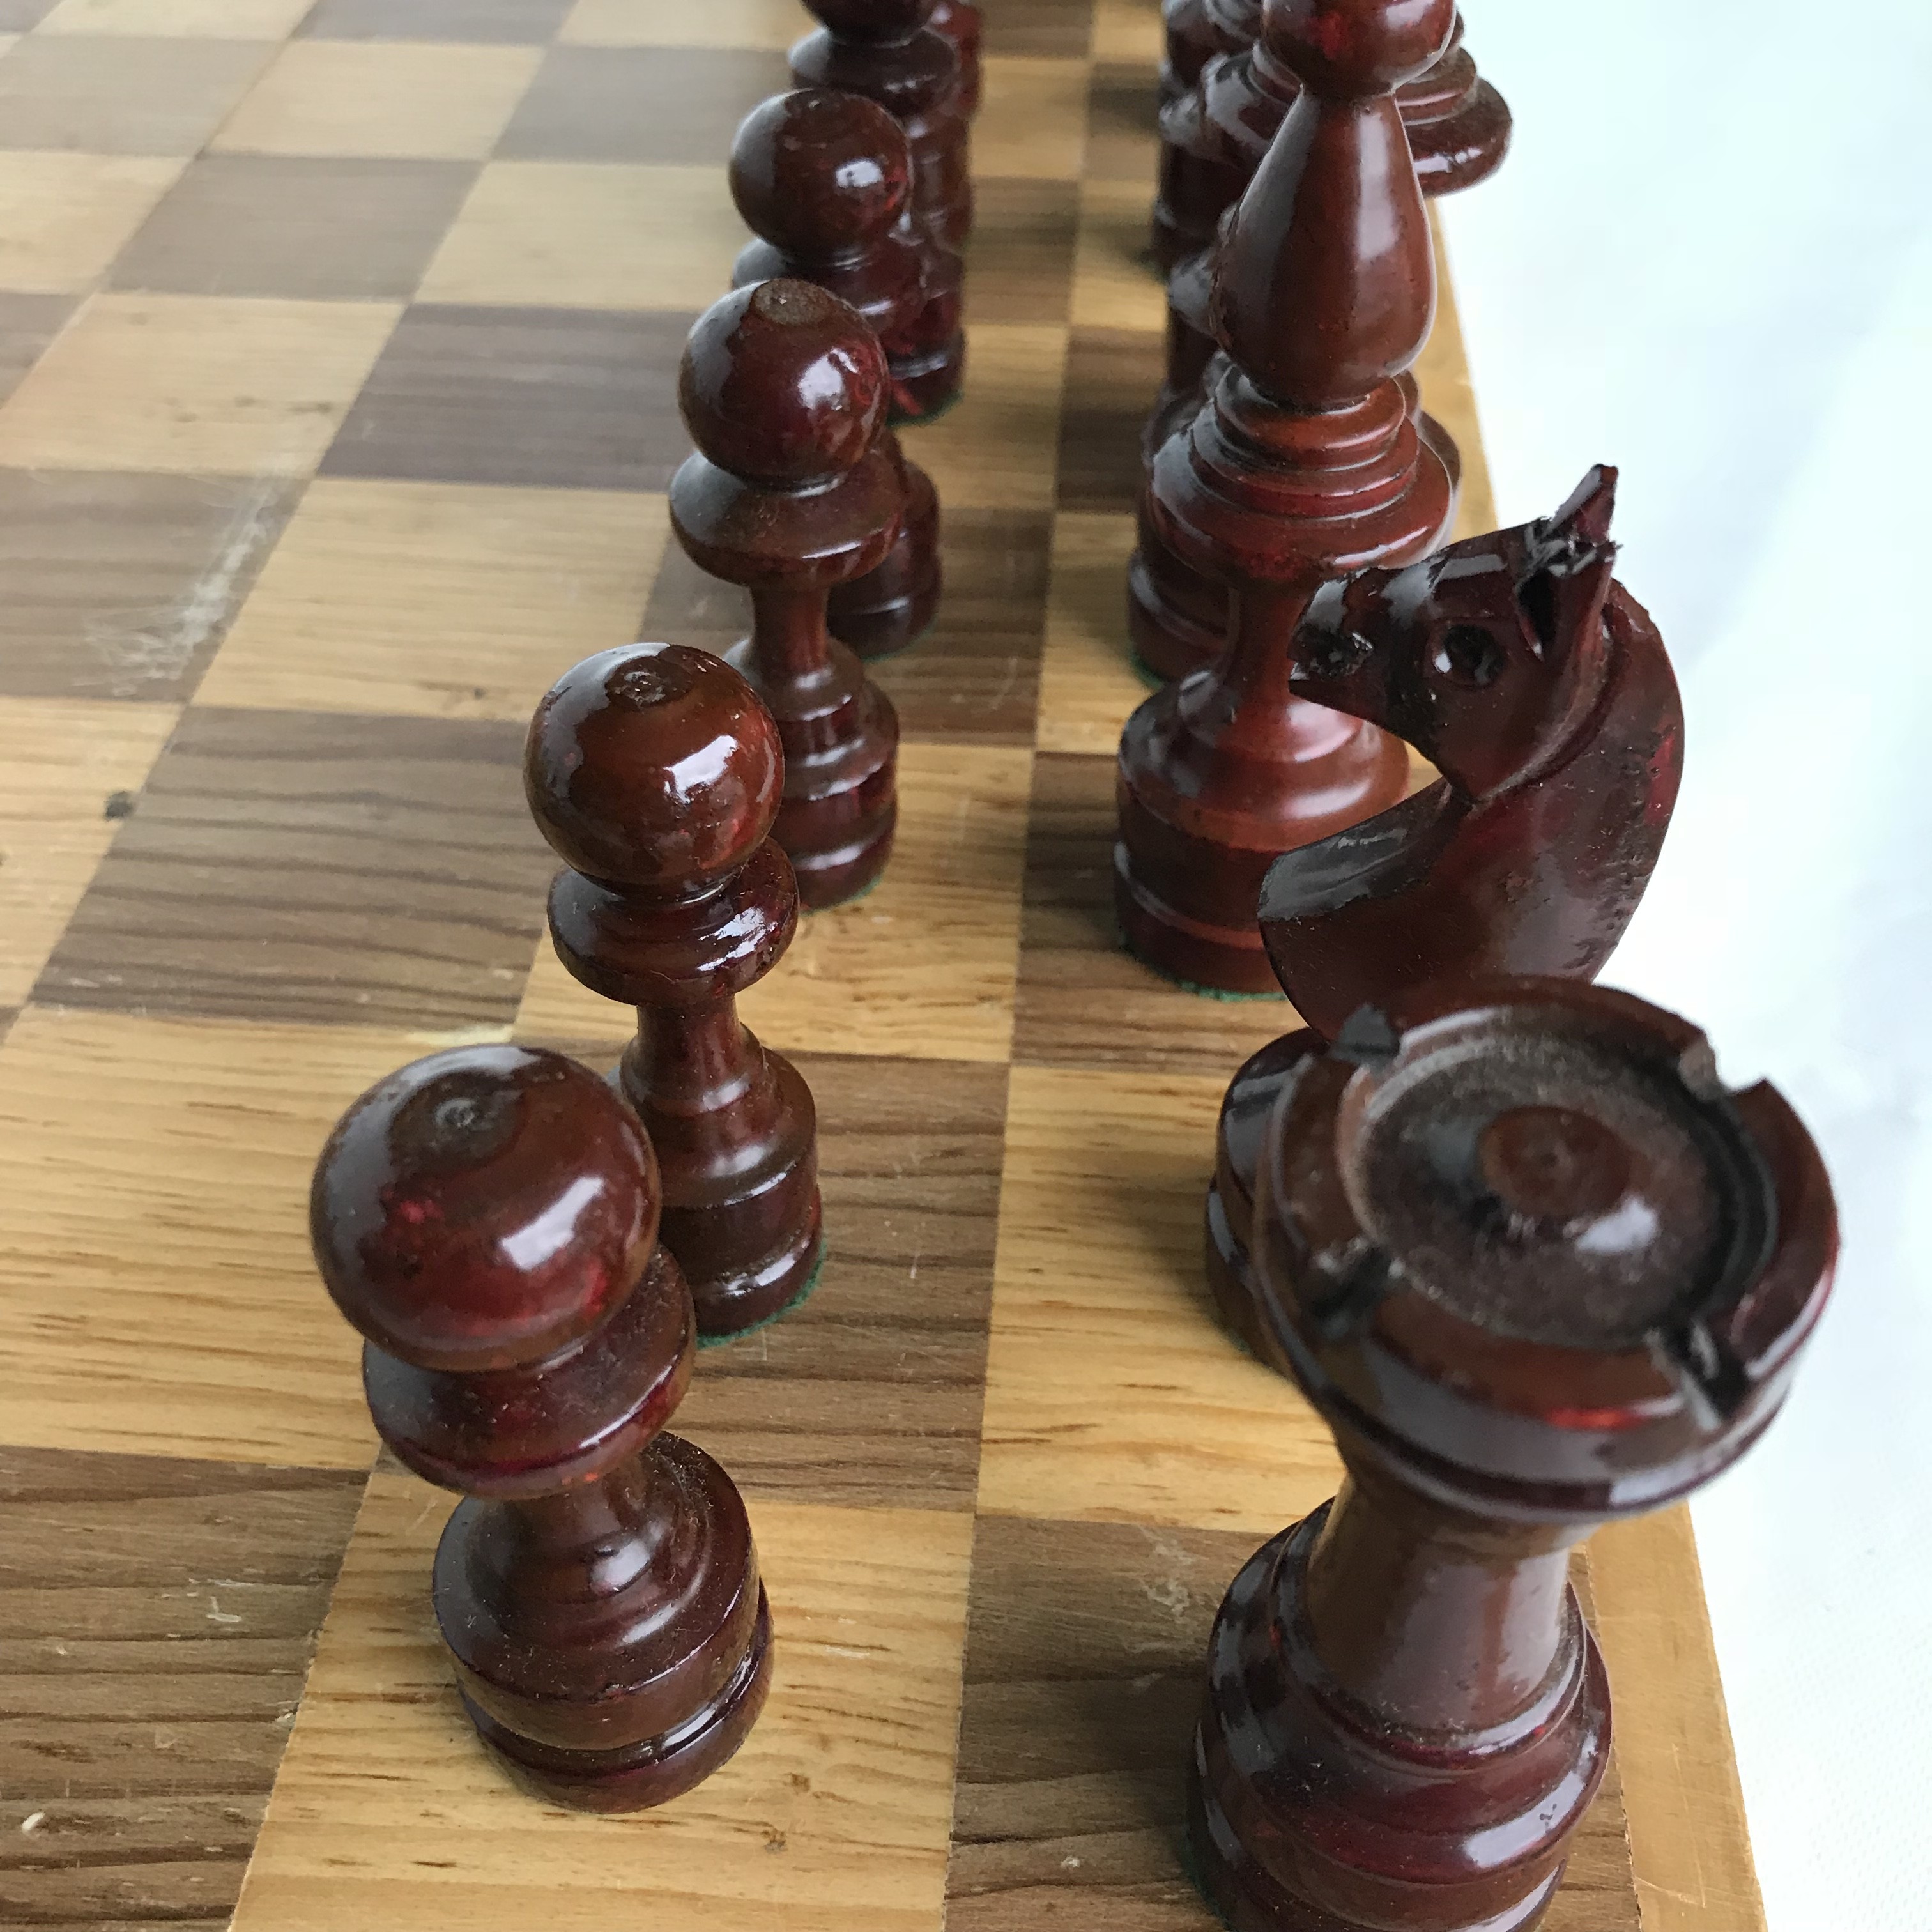 Hand Carvedmade Wooden Chess Set Each Piece Has Been Hand Carved